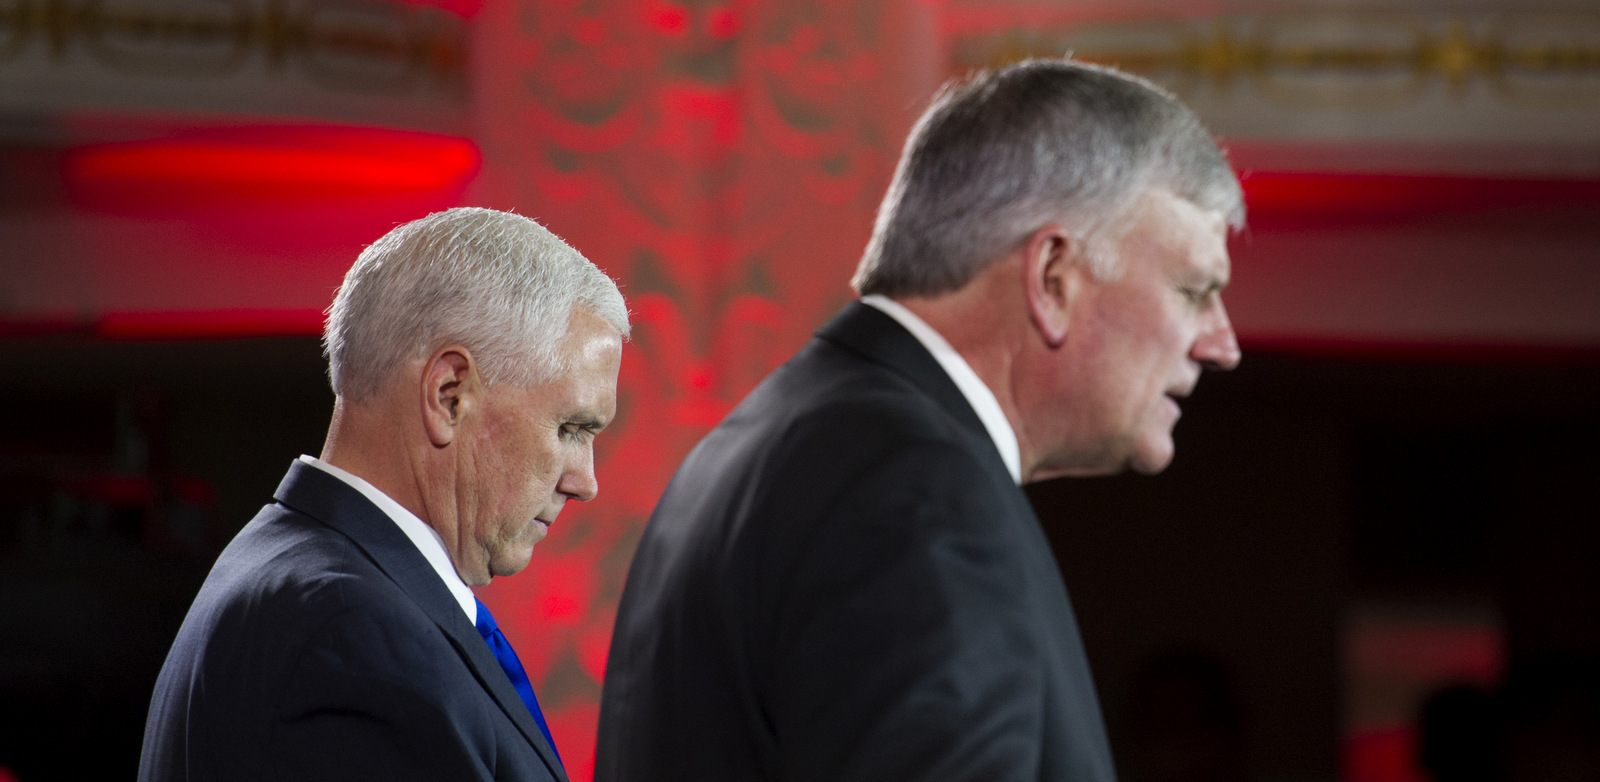 Franklin Graham, right, prays for Vice President Mike Pence during the World Summit in Defense of Persecuted Christians hosted by Graham, and the Billy Graham Evangelistic Association, May 11, 2017, in Washington. (AP/Cliff Owen)